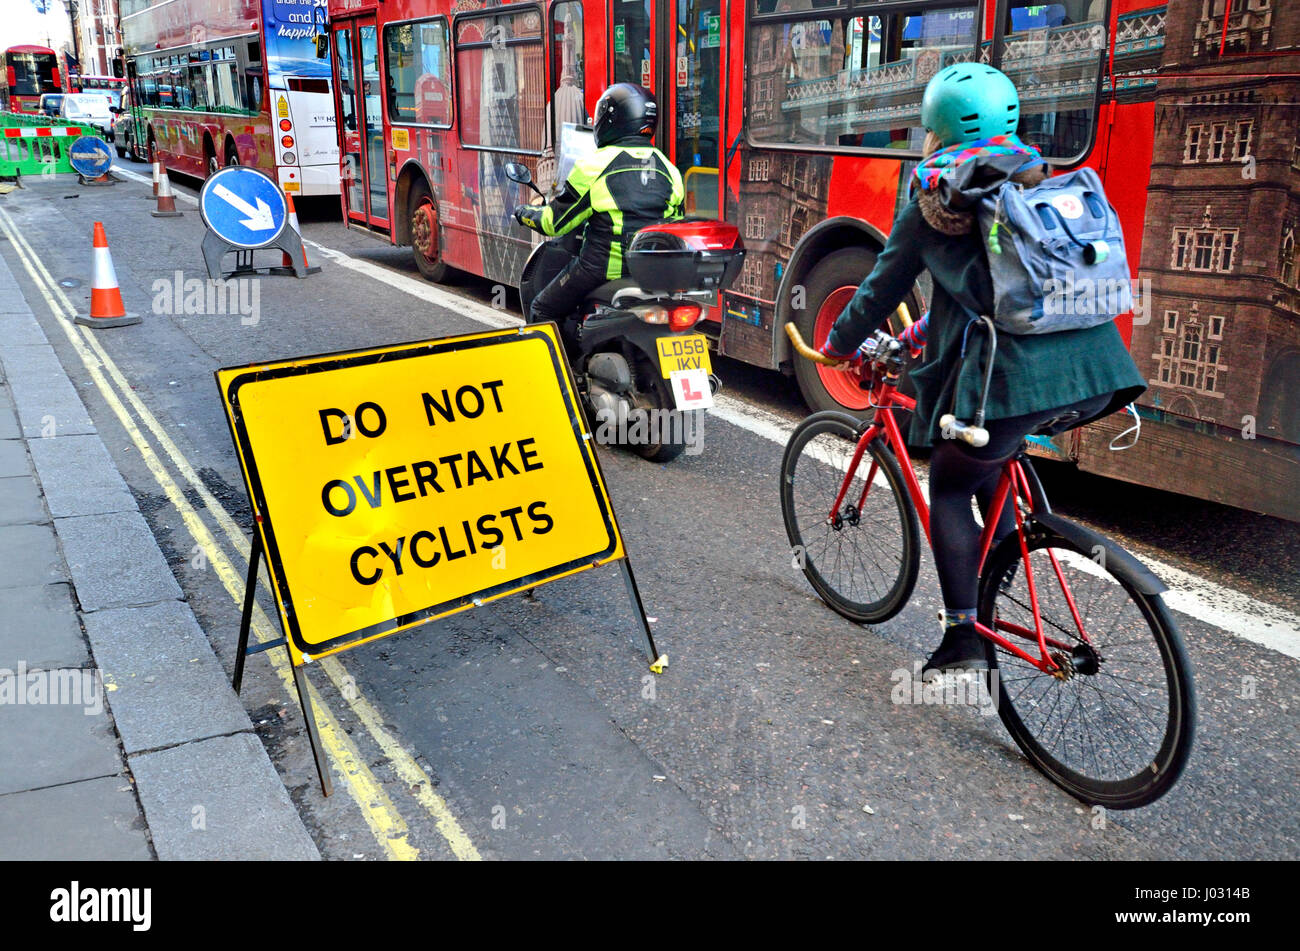 London, England, UK. 'Do not overtake cyclists' sign in busy road Stock Photo